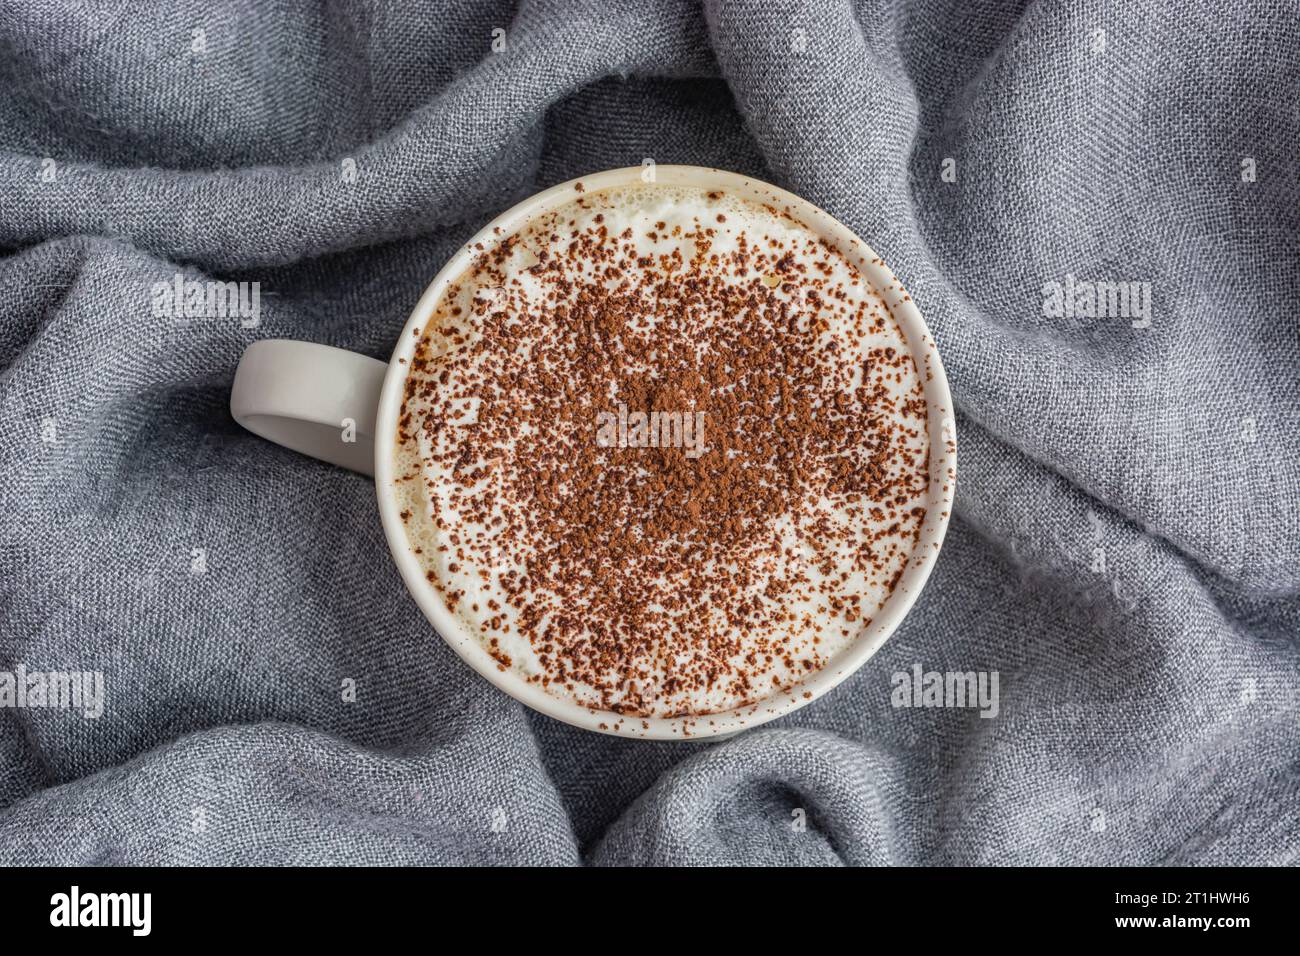 cup of coffee on gray fabric background top view Stock Photo